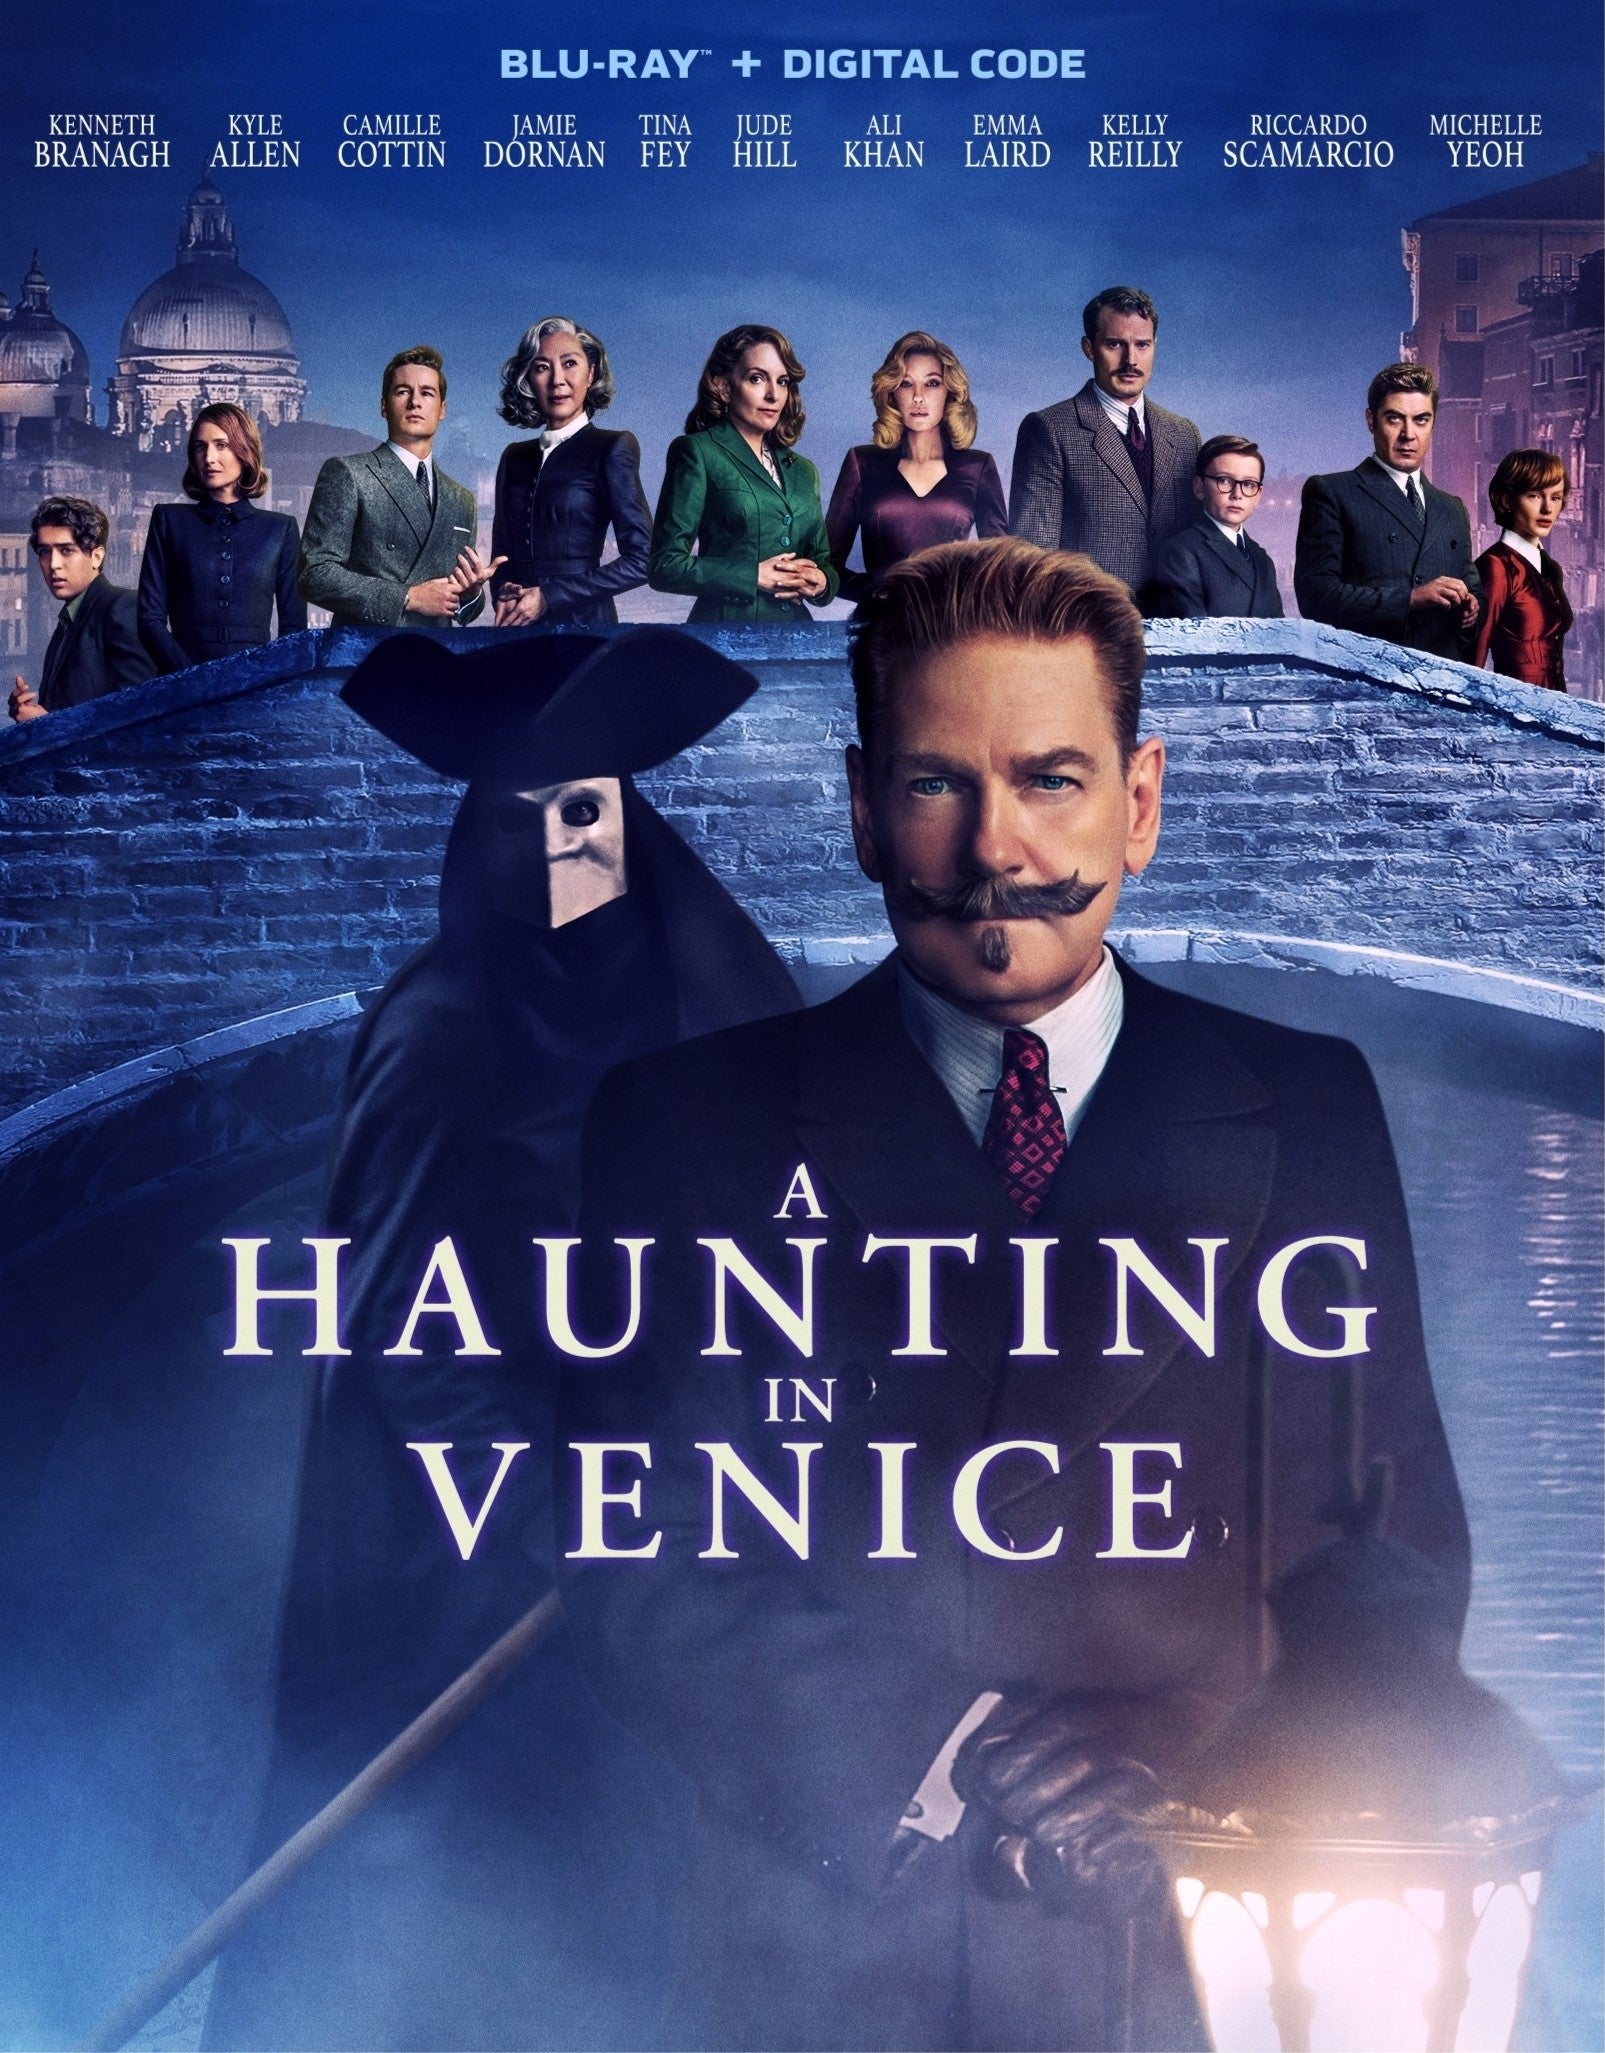 A HAUNTING IN VENICE BLU-RAY